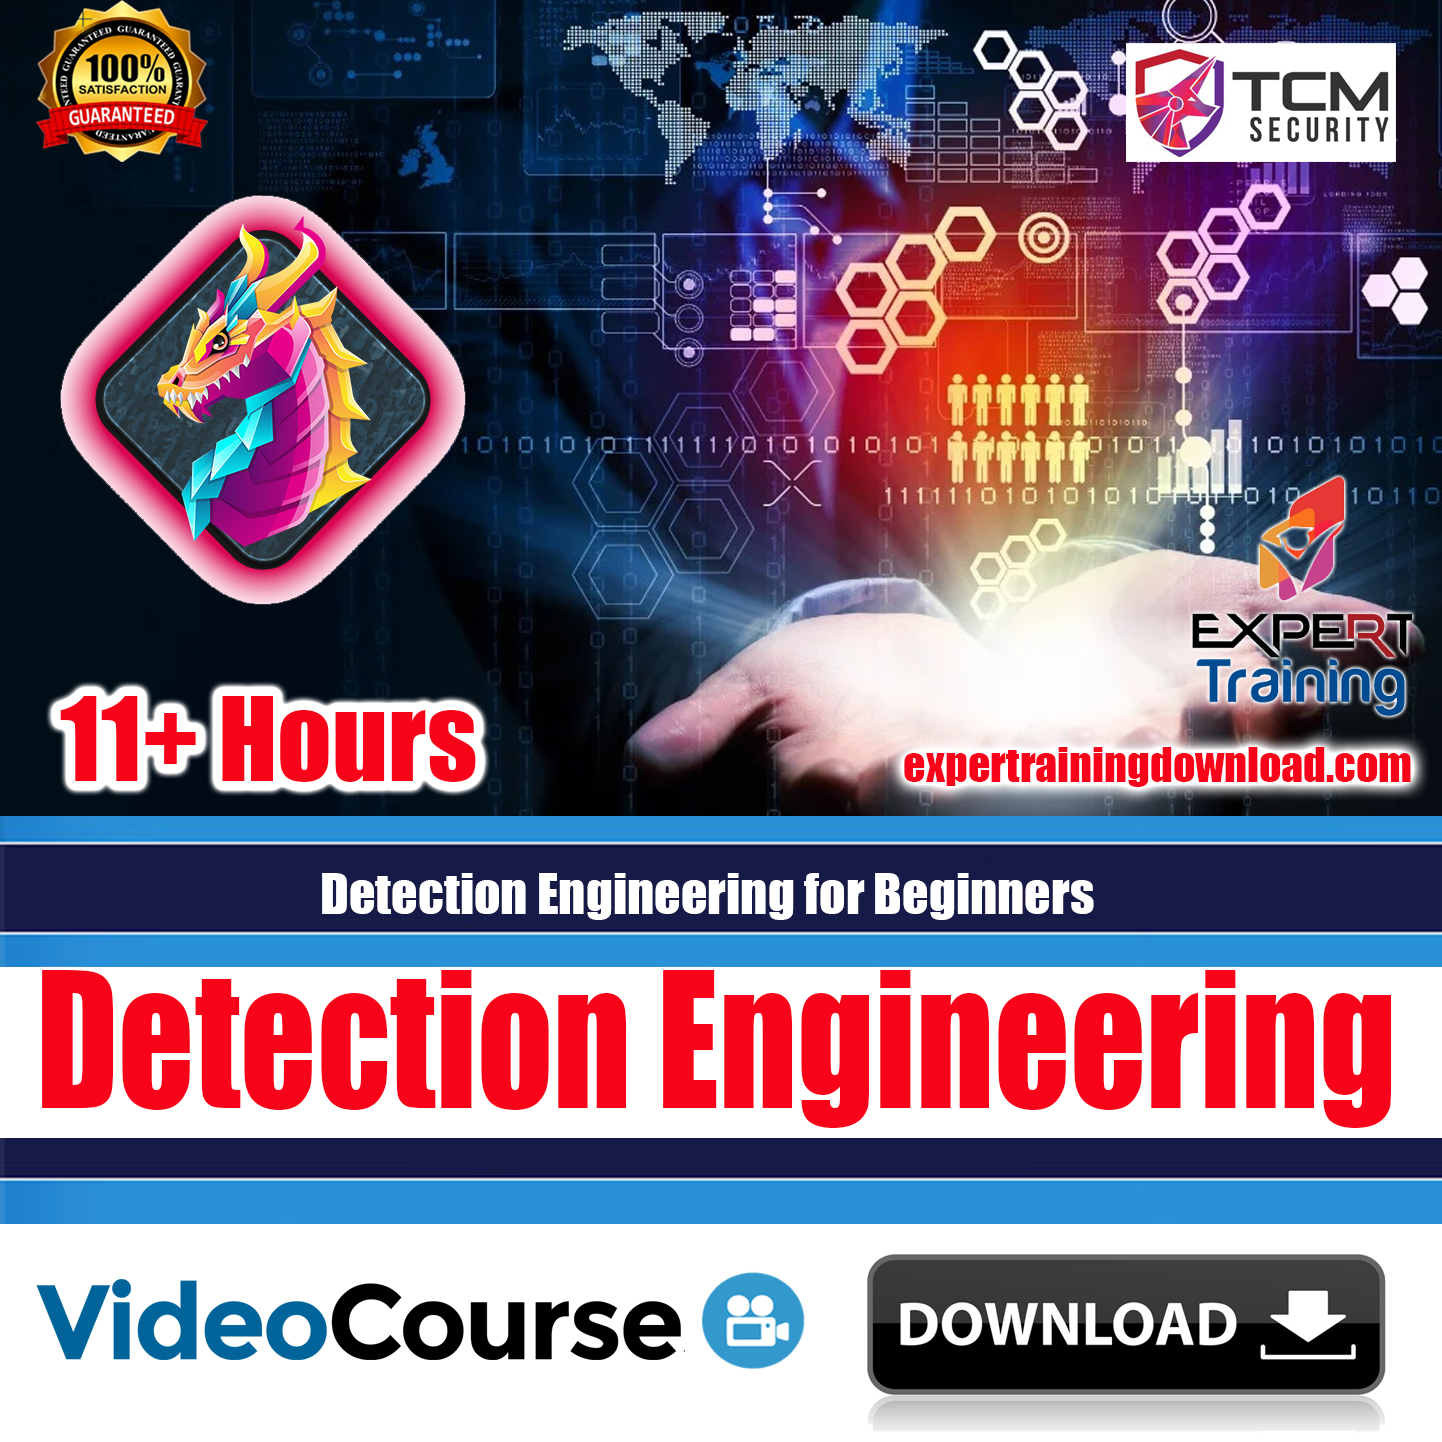 Detection Engineering for Beginners